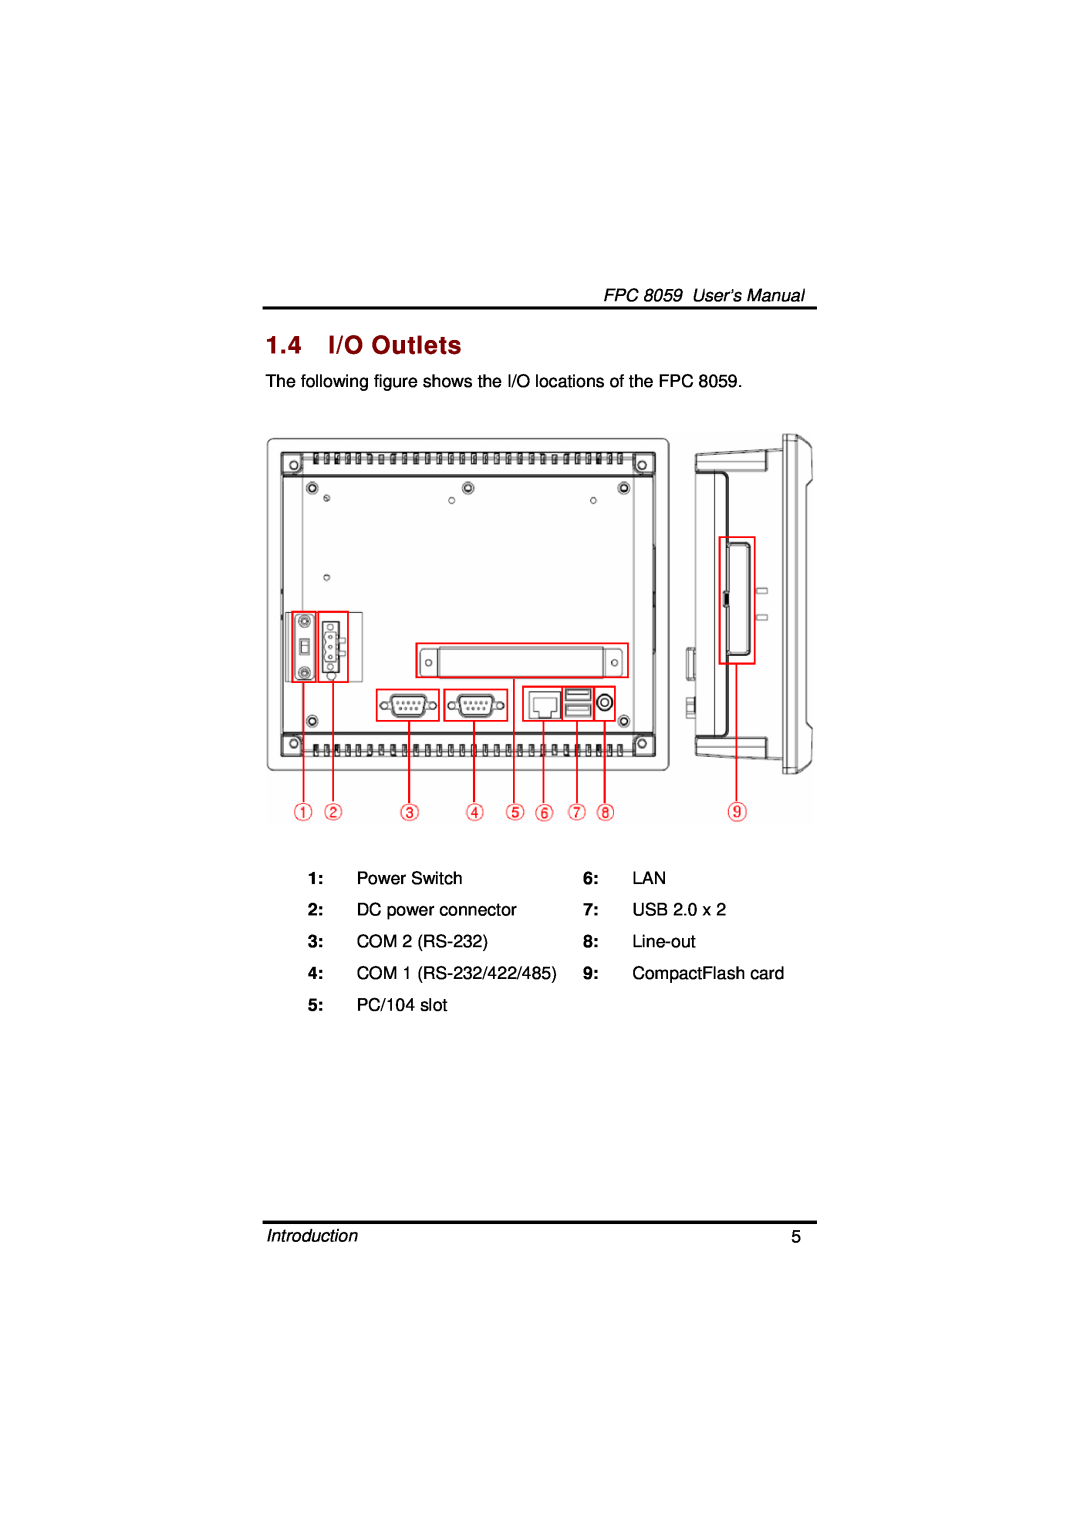 Acnodes user manual 1.4 I/O Outlets, FPC 8059 User’s Manual, Introduction, CompactFlash card 